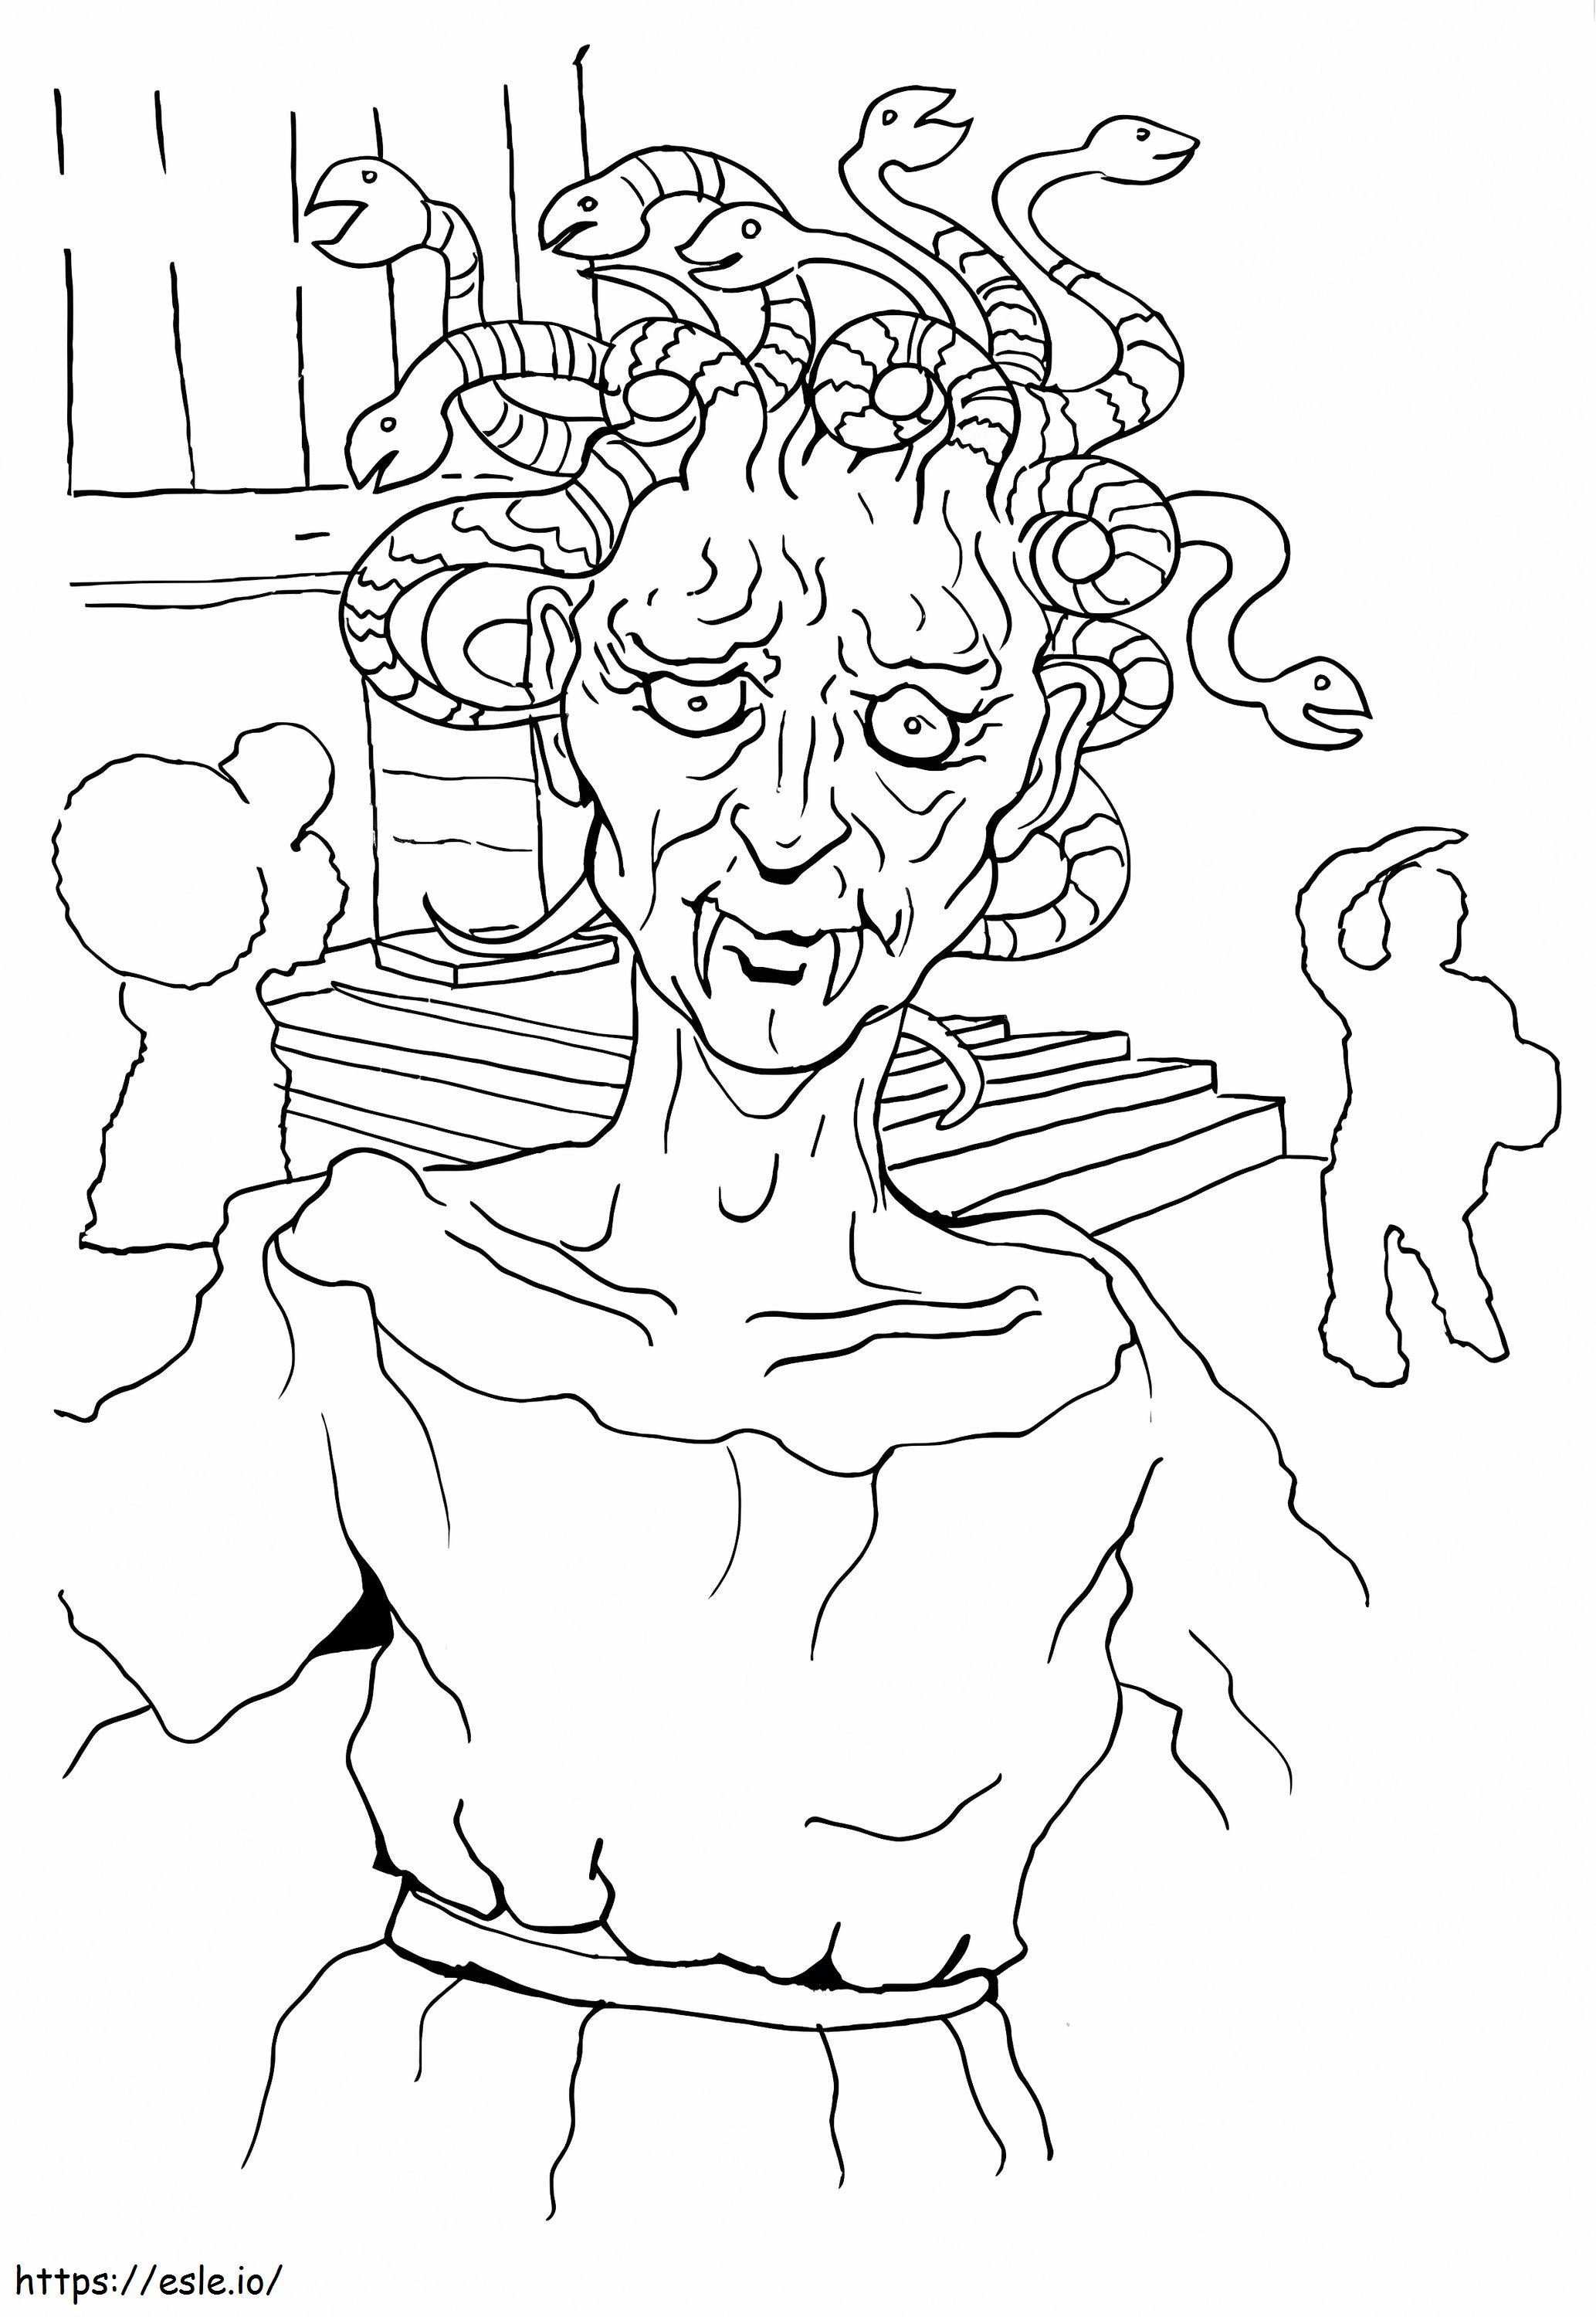 Ugly Medusa coloring page